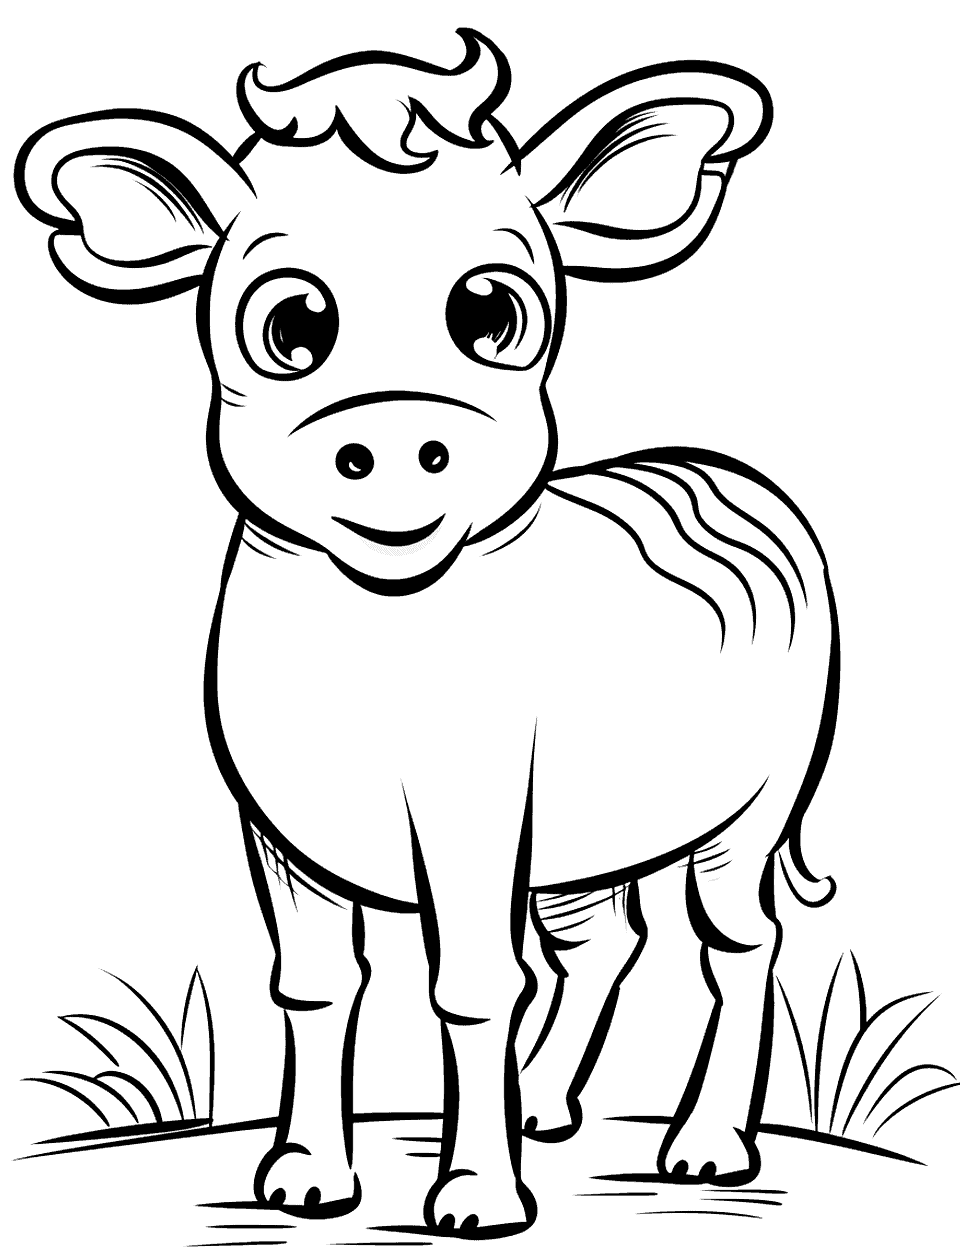 Cow on Farm Coloring Page - A cow standing and looking curious.